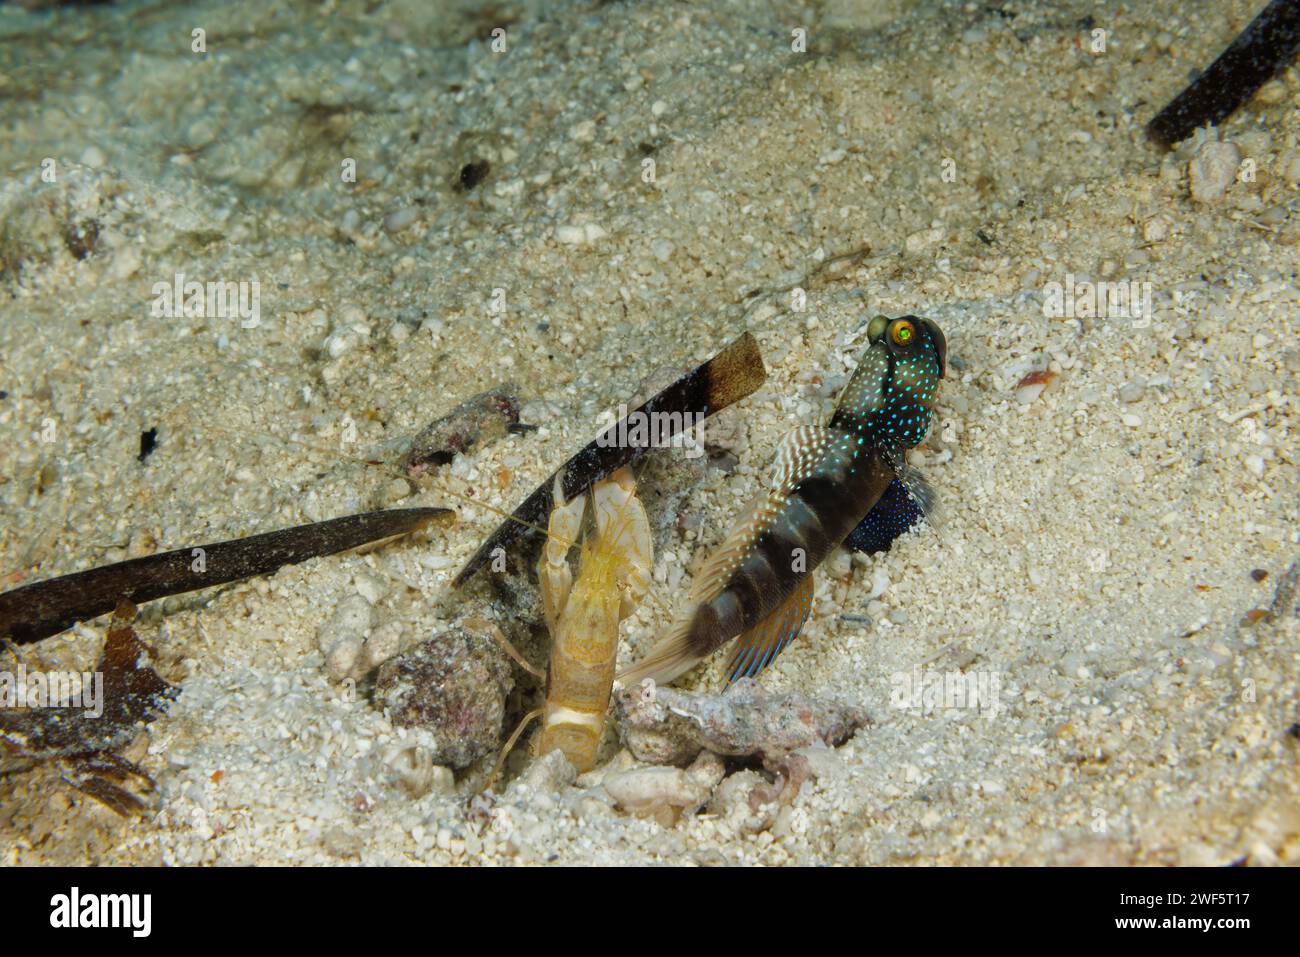 This is the dark variation of the banded shrimpgoby, Cryptocentrus cinctus. This species is more often found as bright yellow. The alpheid shrimp, Alp Stock Photo